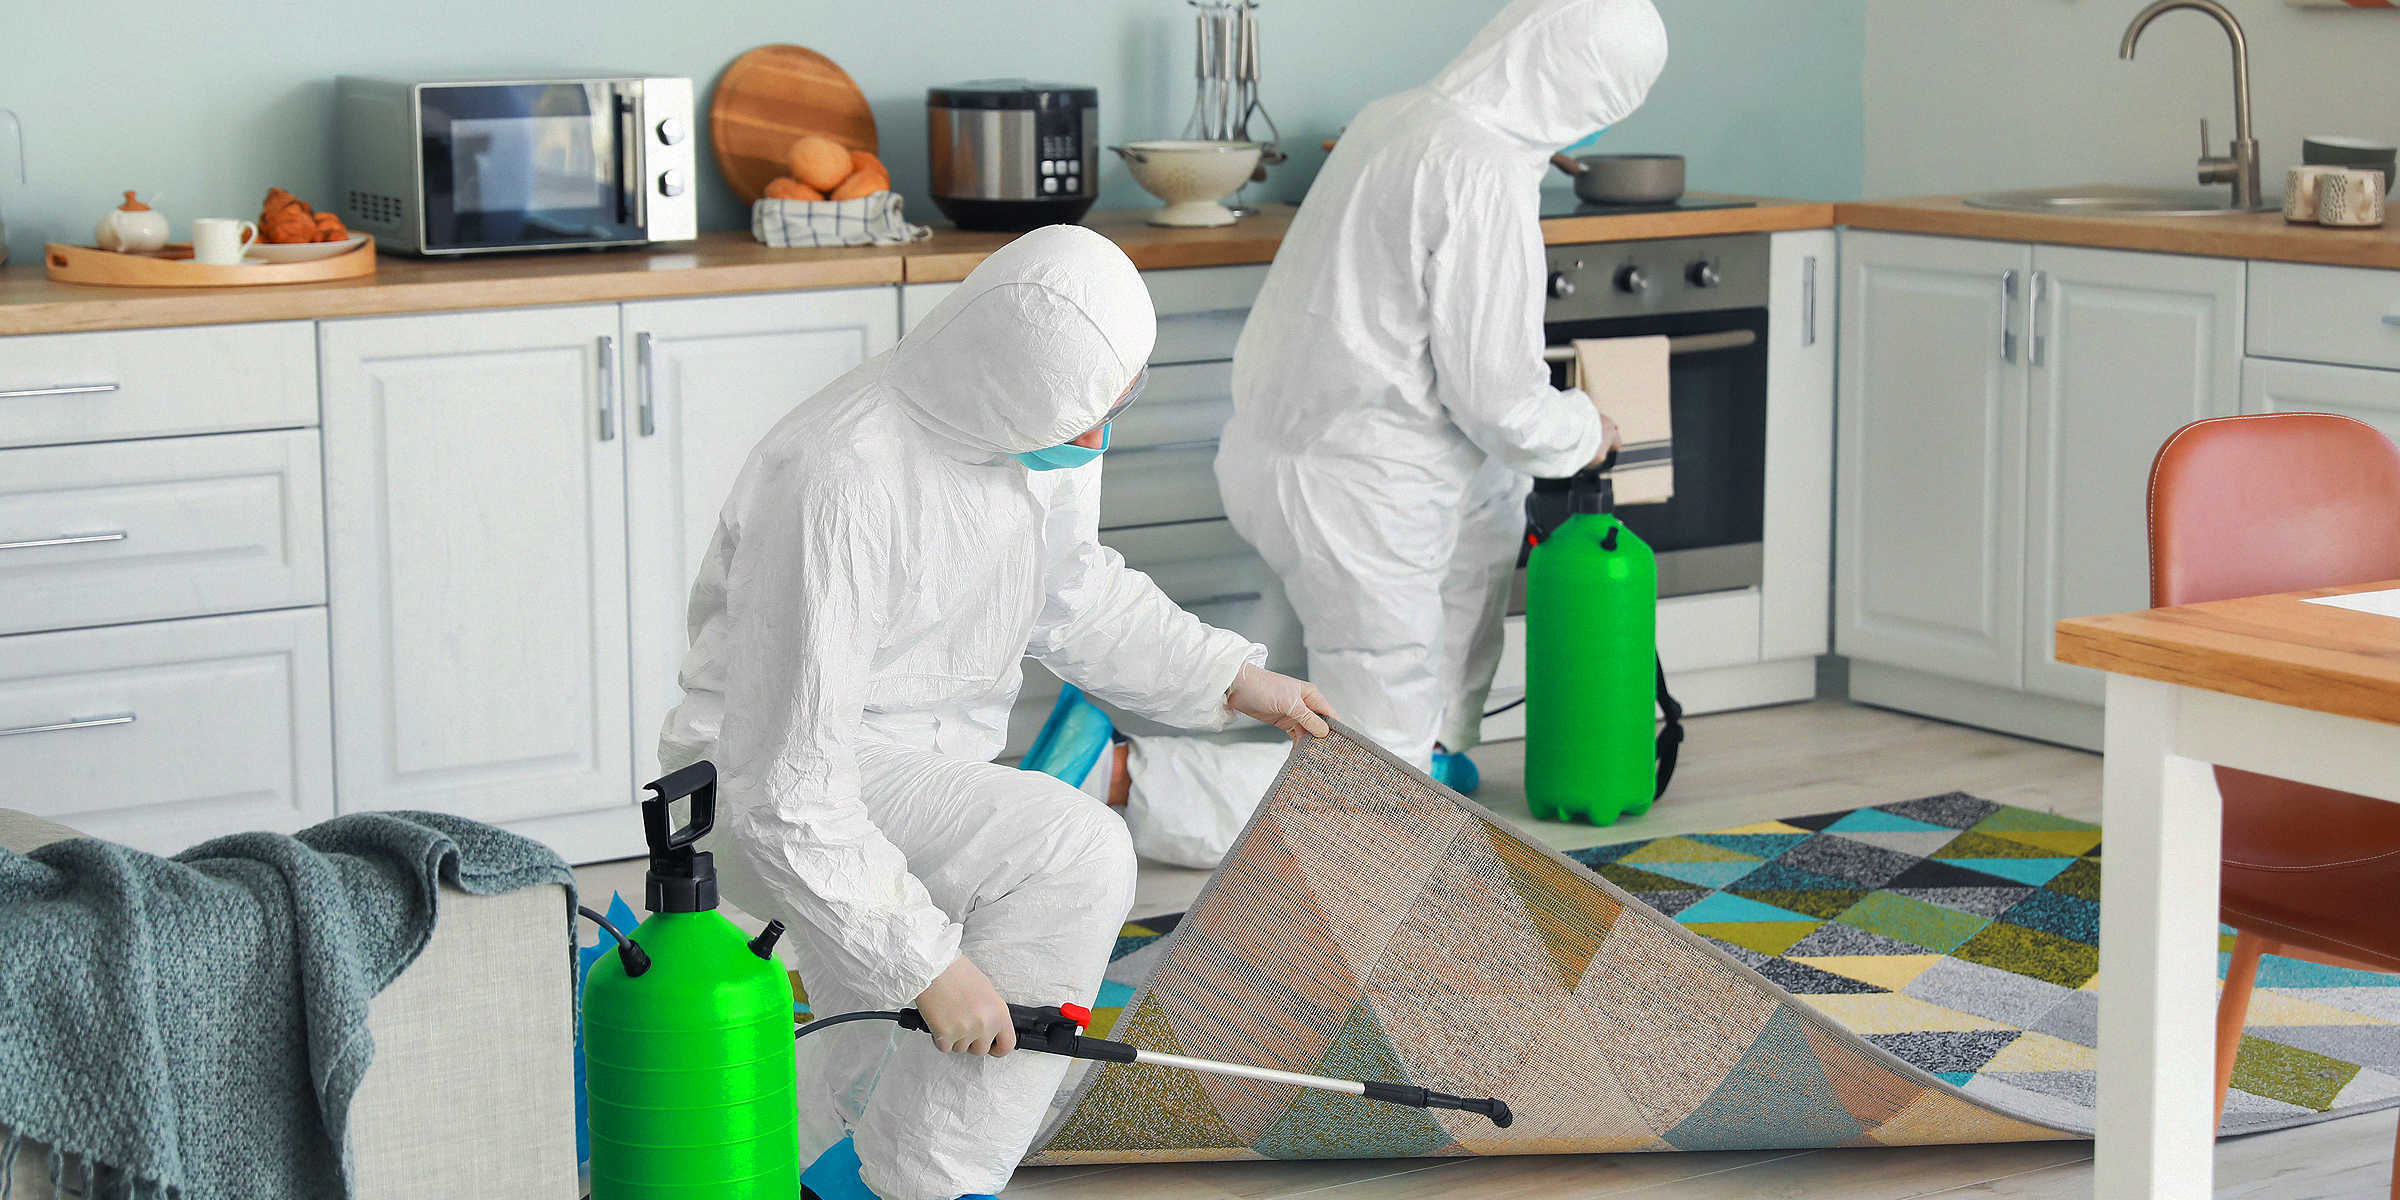 Professional fumigating a home | Source: Getty Images